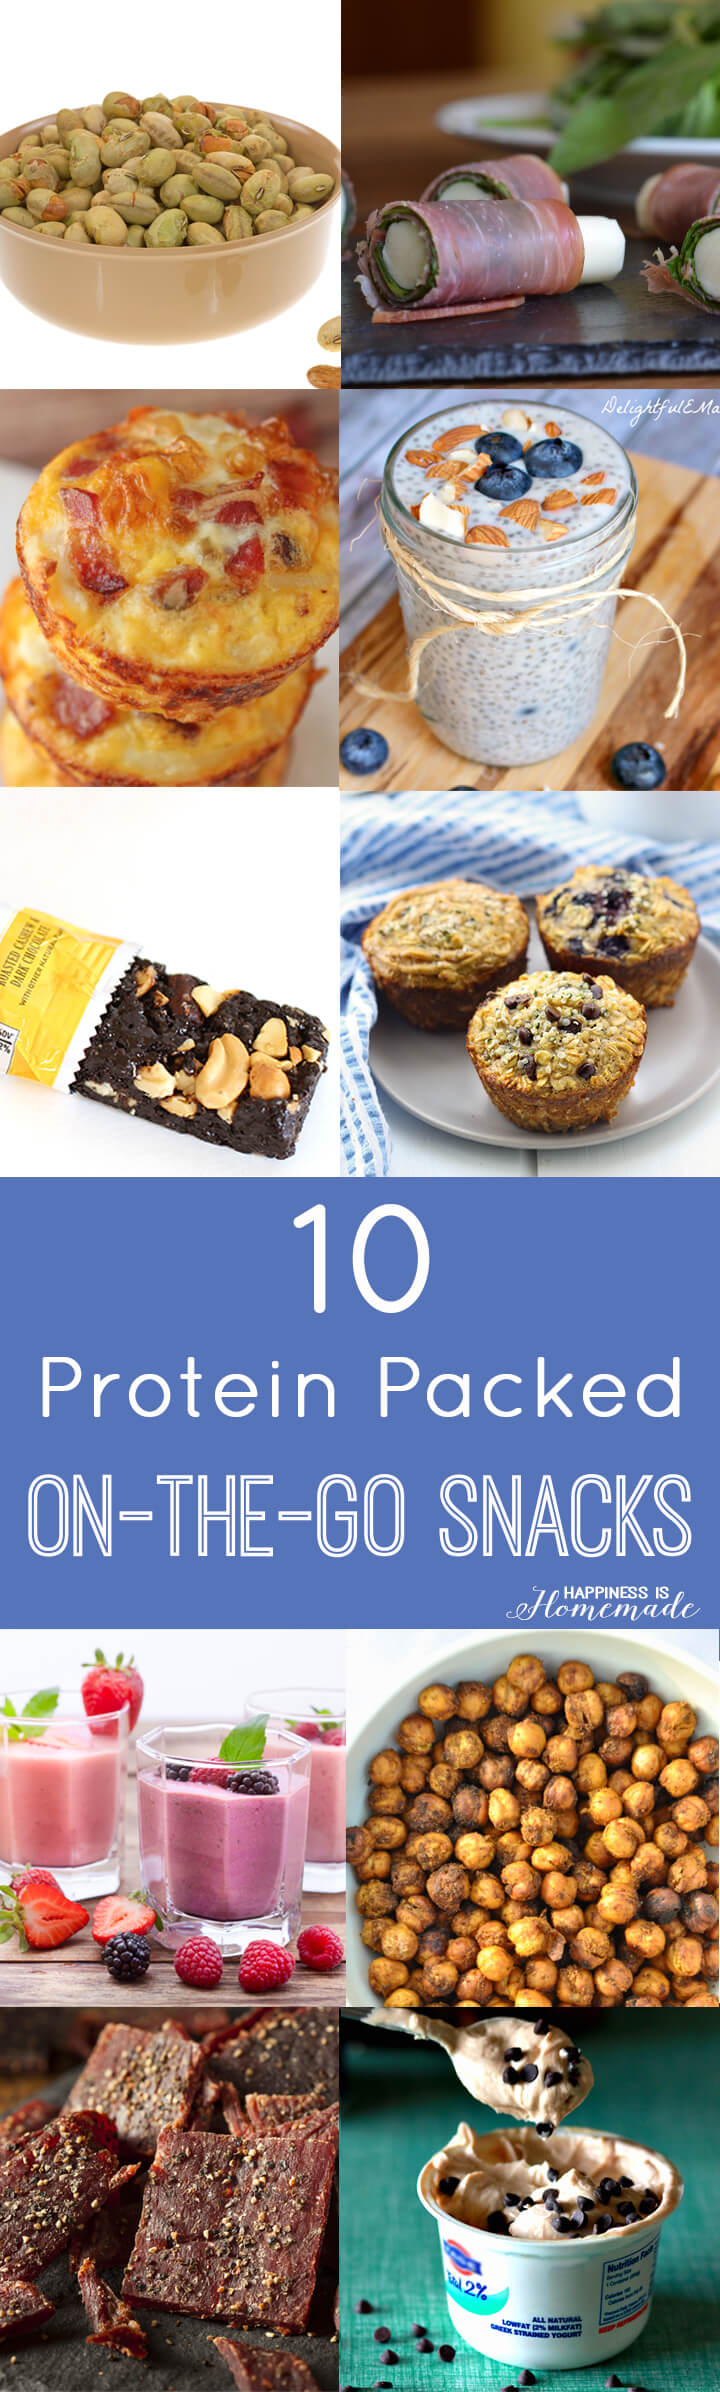 10 protein packed on the go snacks